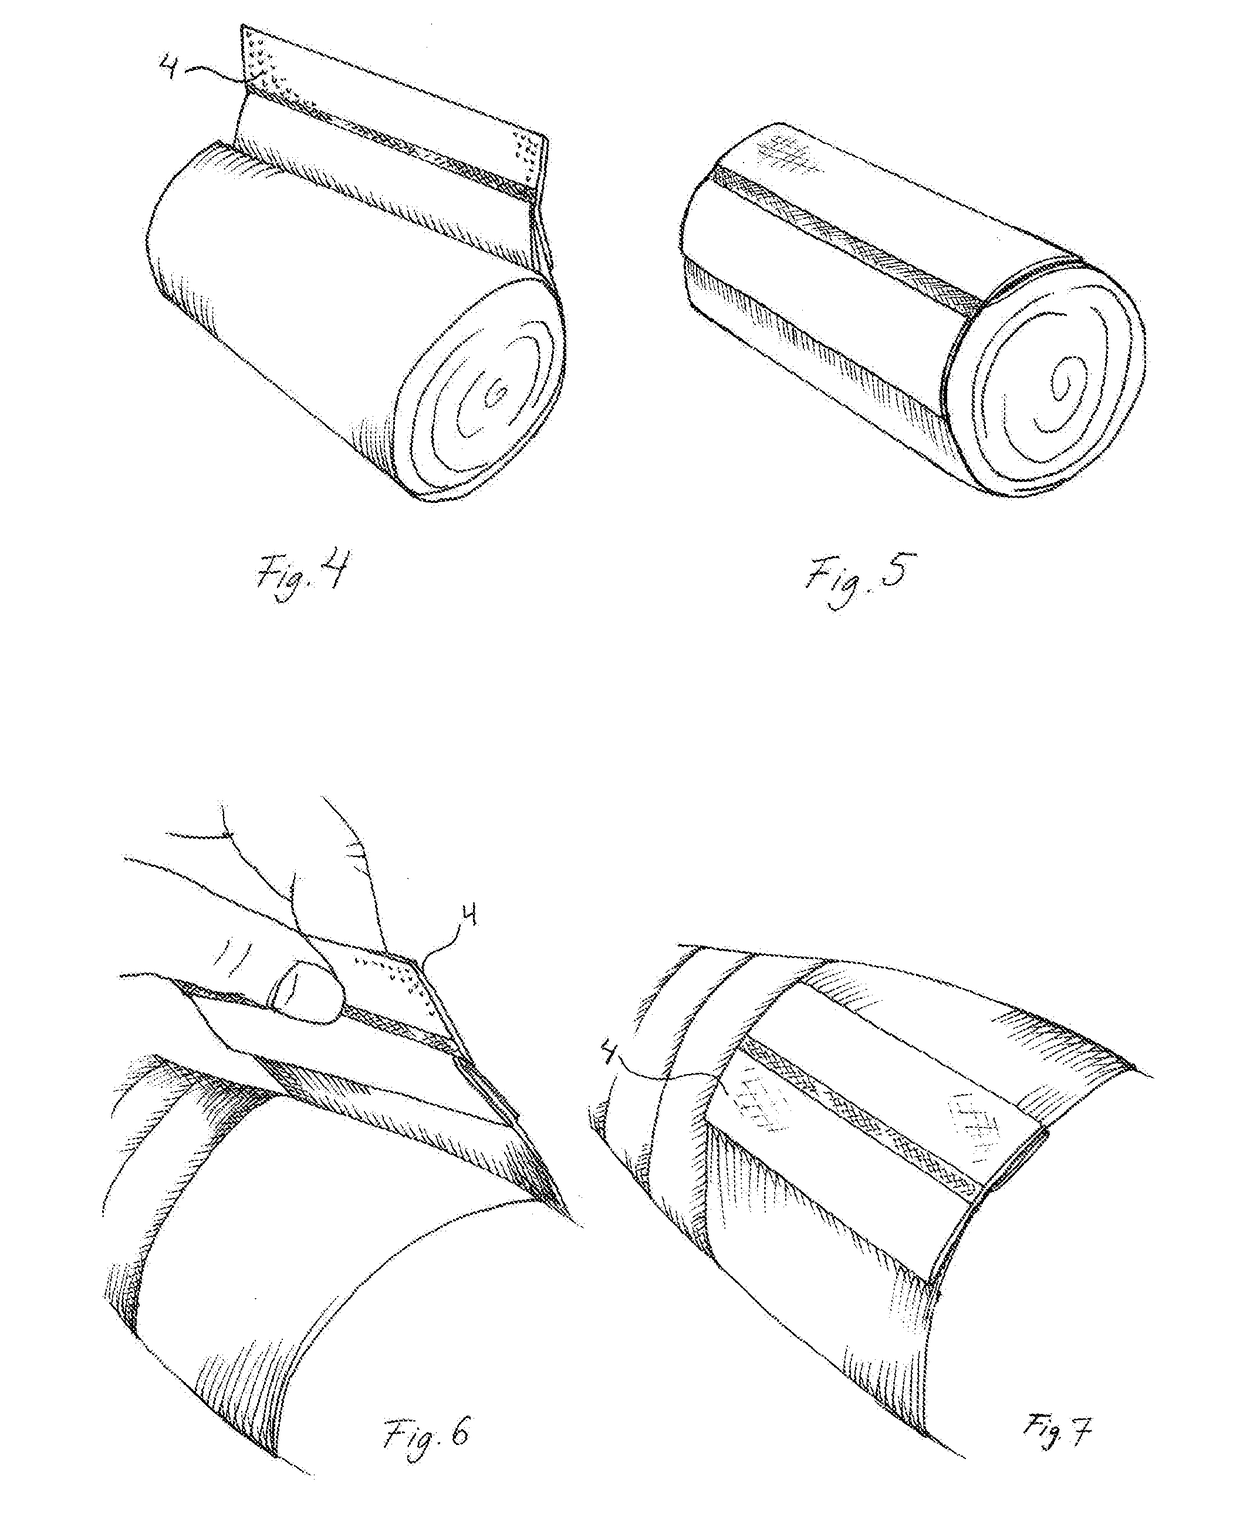 A bandage securing device